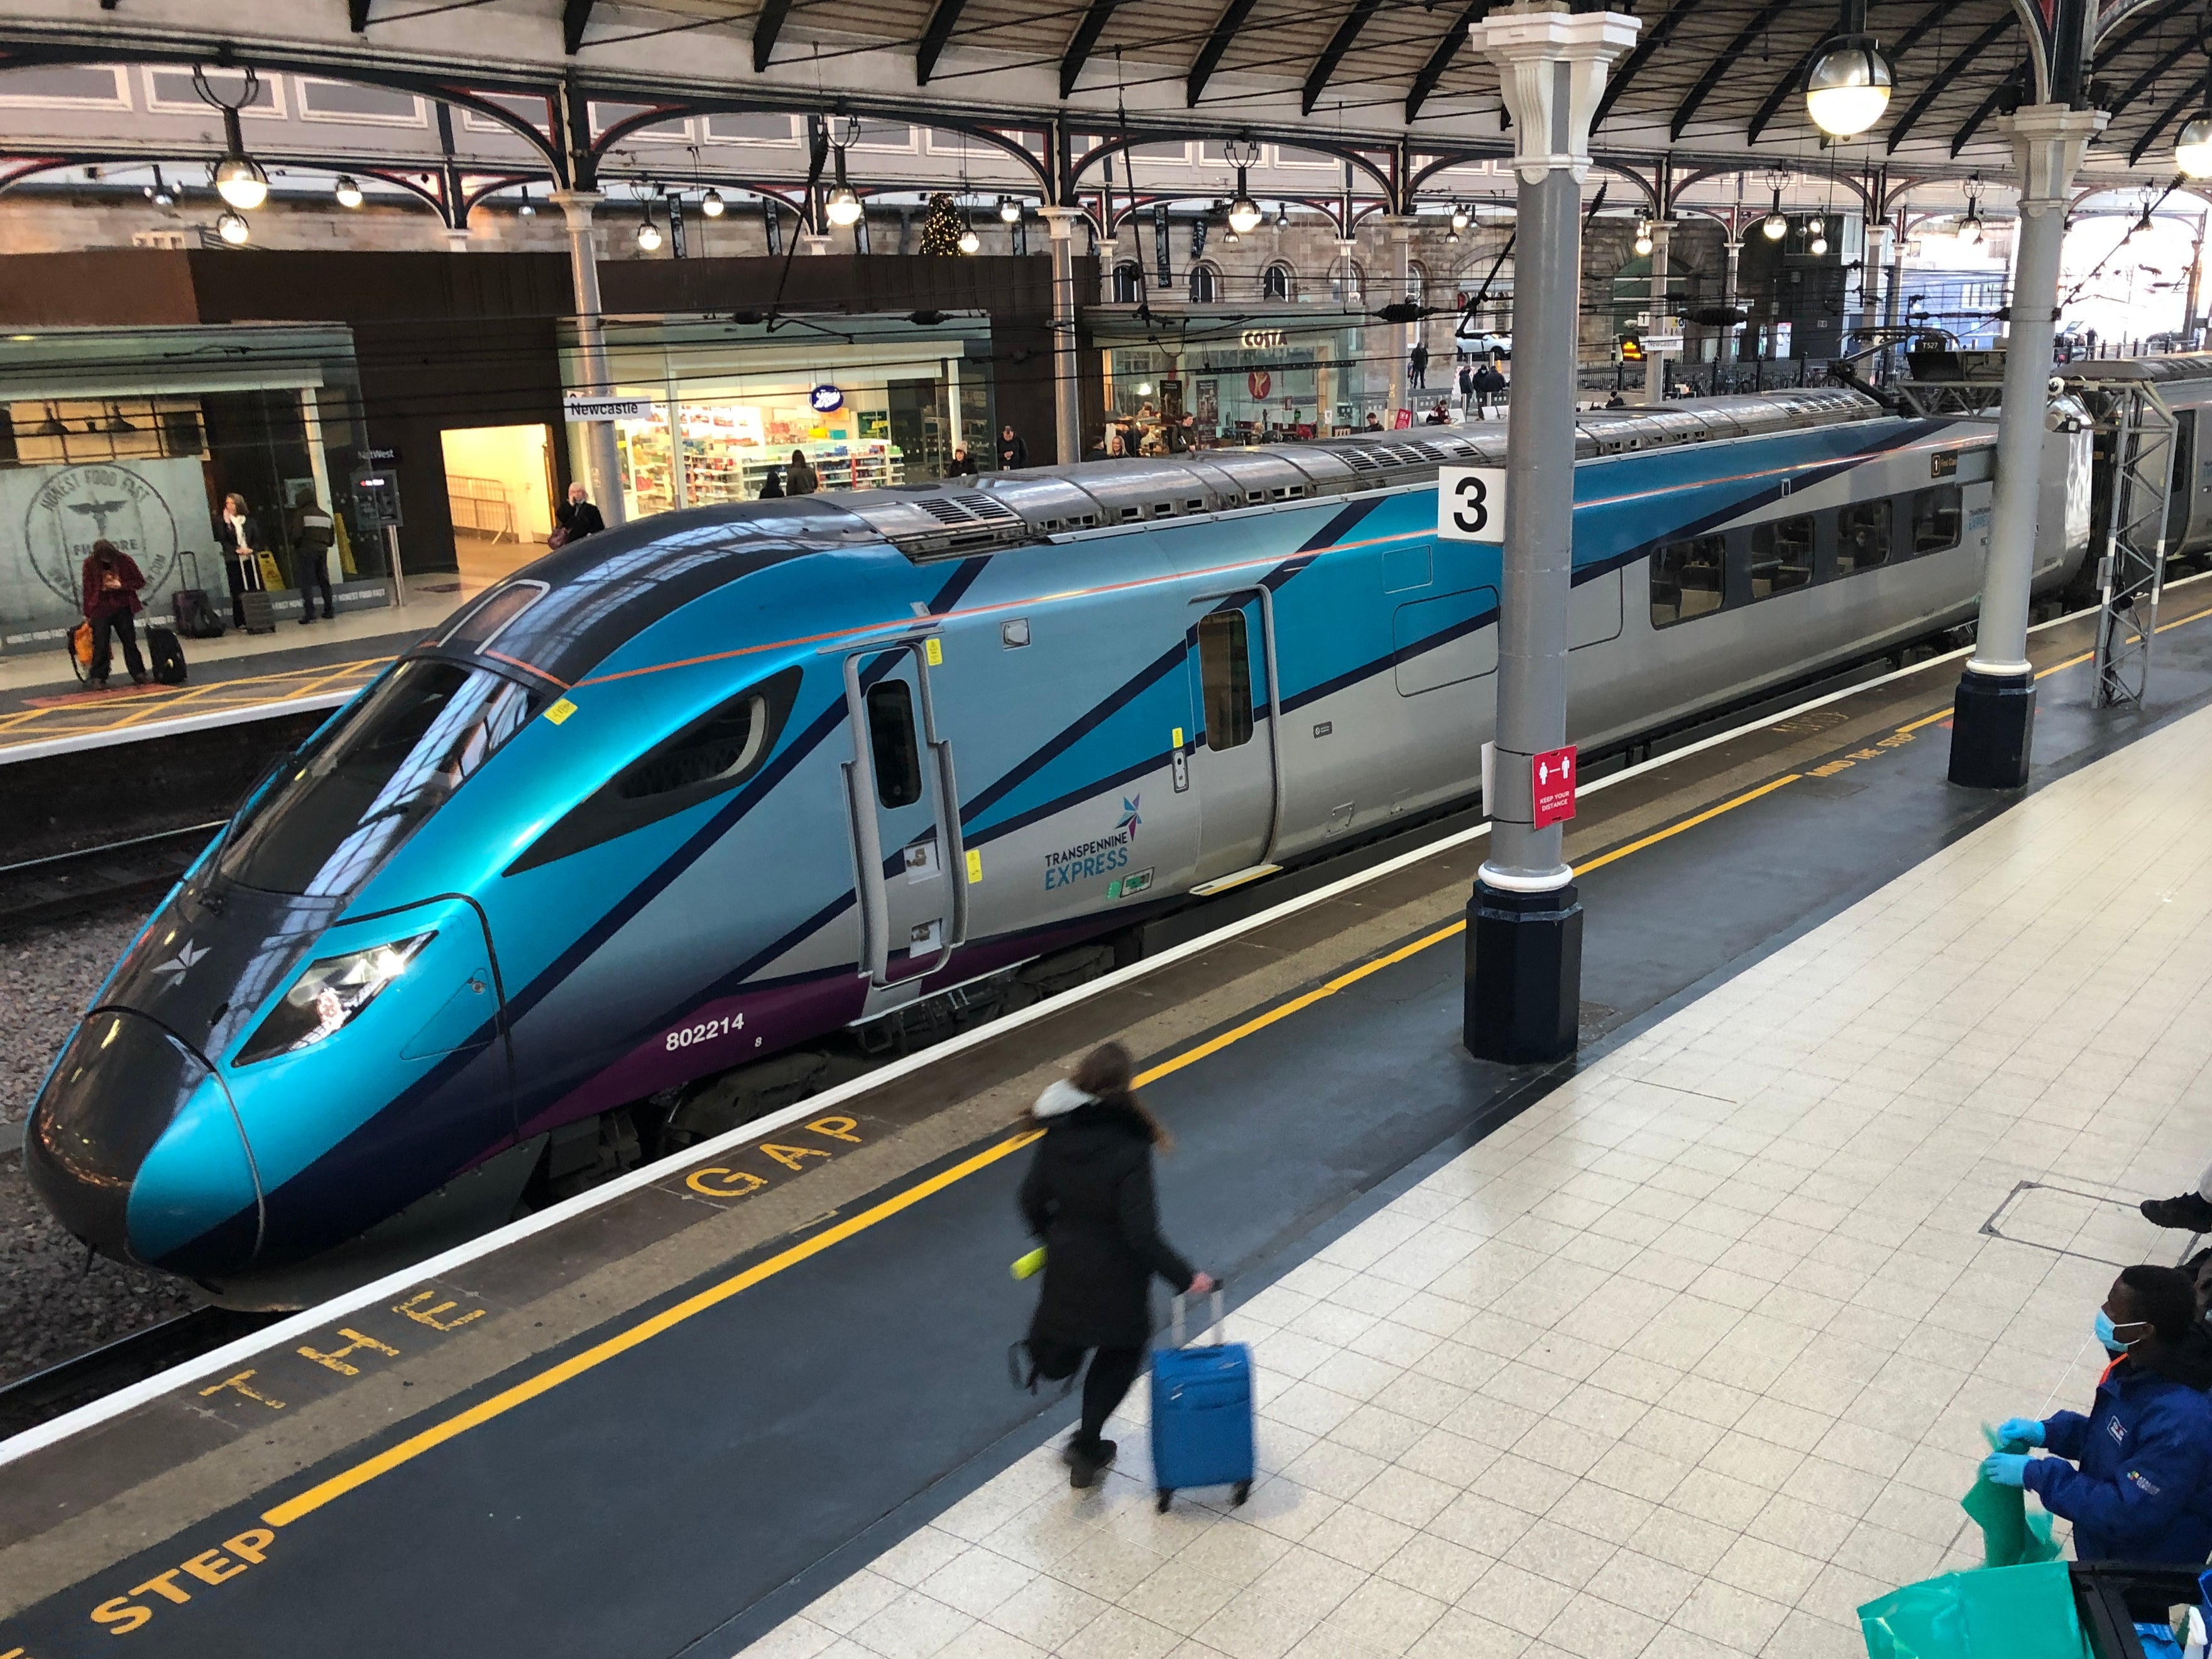 Departing soon? TransPennine Express train at Newcastle station. The operator has so far cancelled 29 services on Thursday